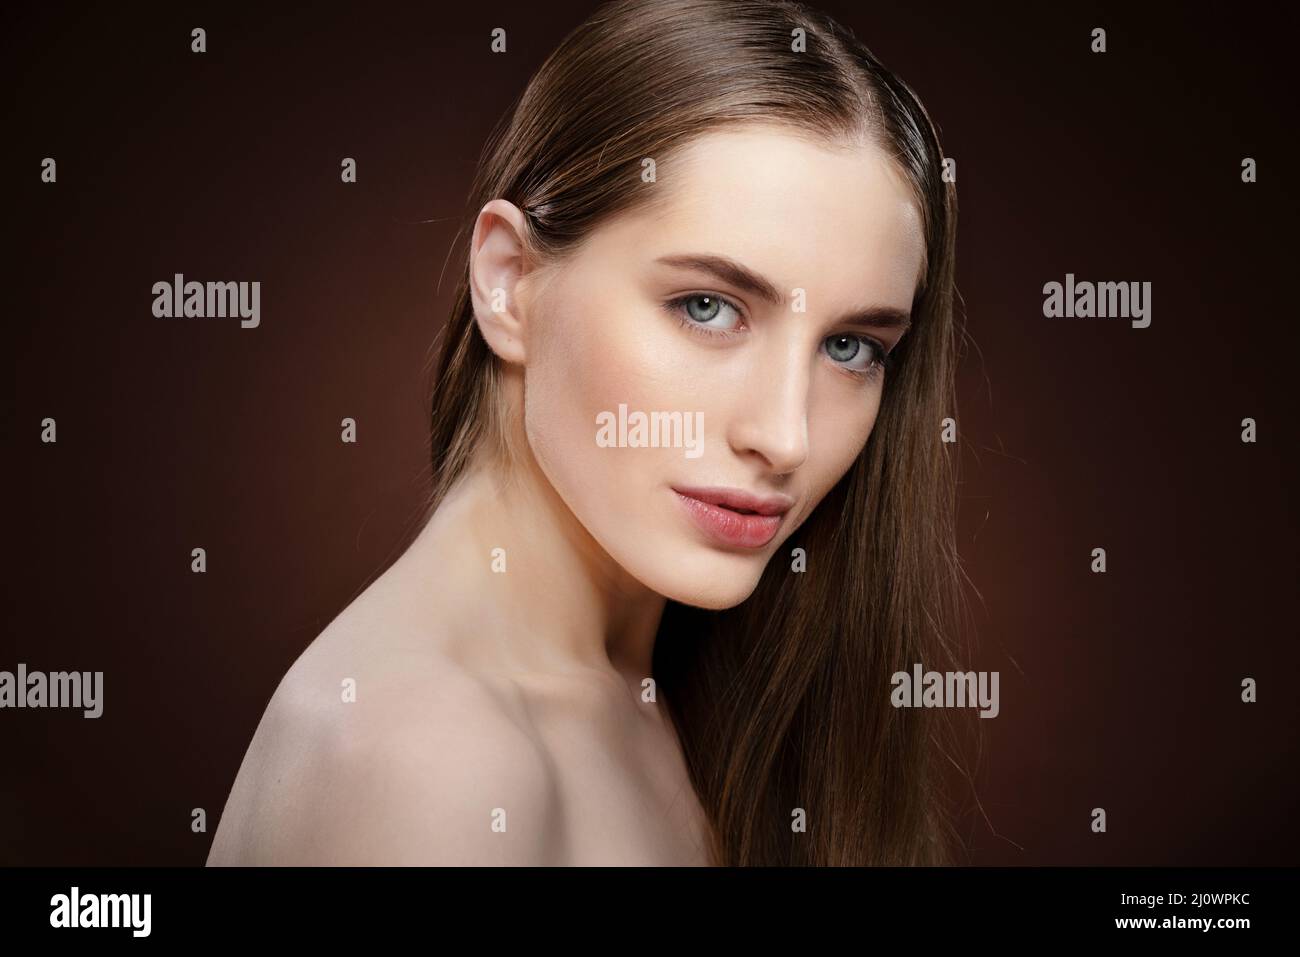 Spa and beautiful concept. Standing half-turned natural beauty woman with no make up face portrait. Healthy pure skin model posi Stock Photo